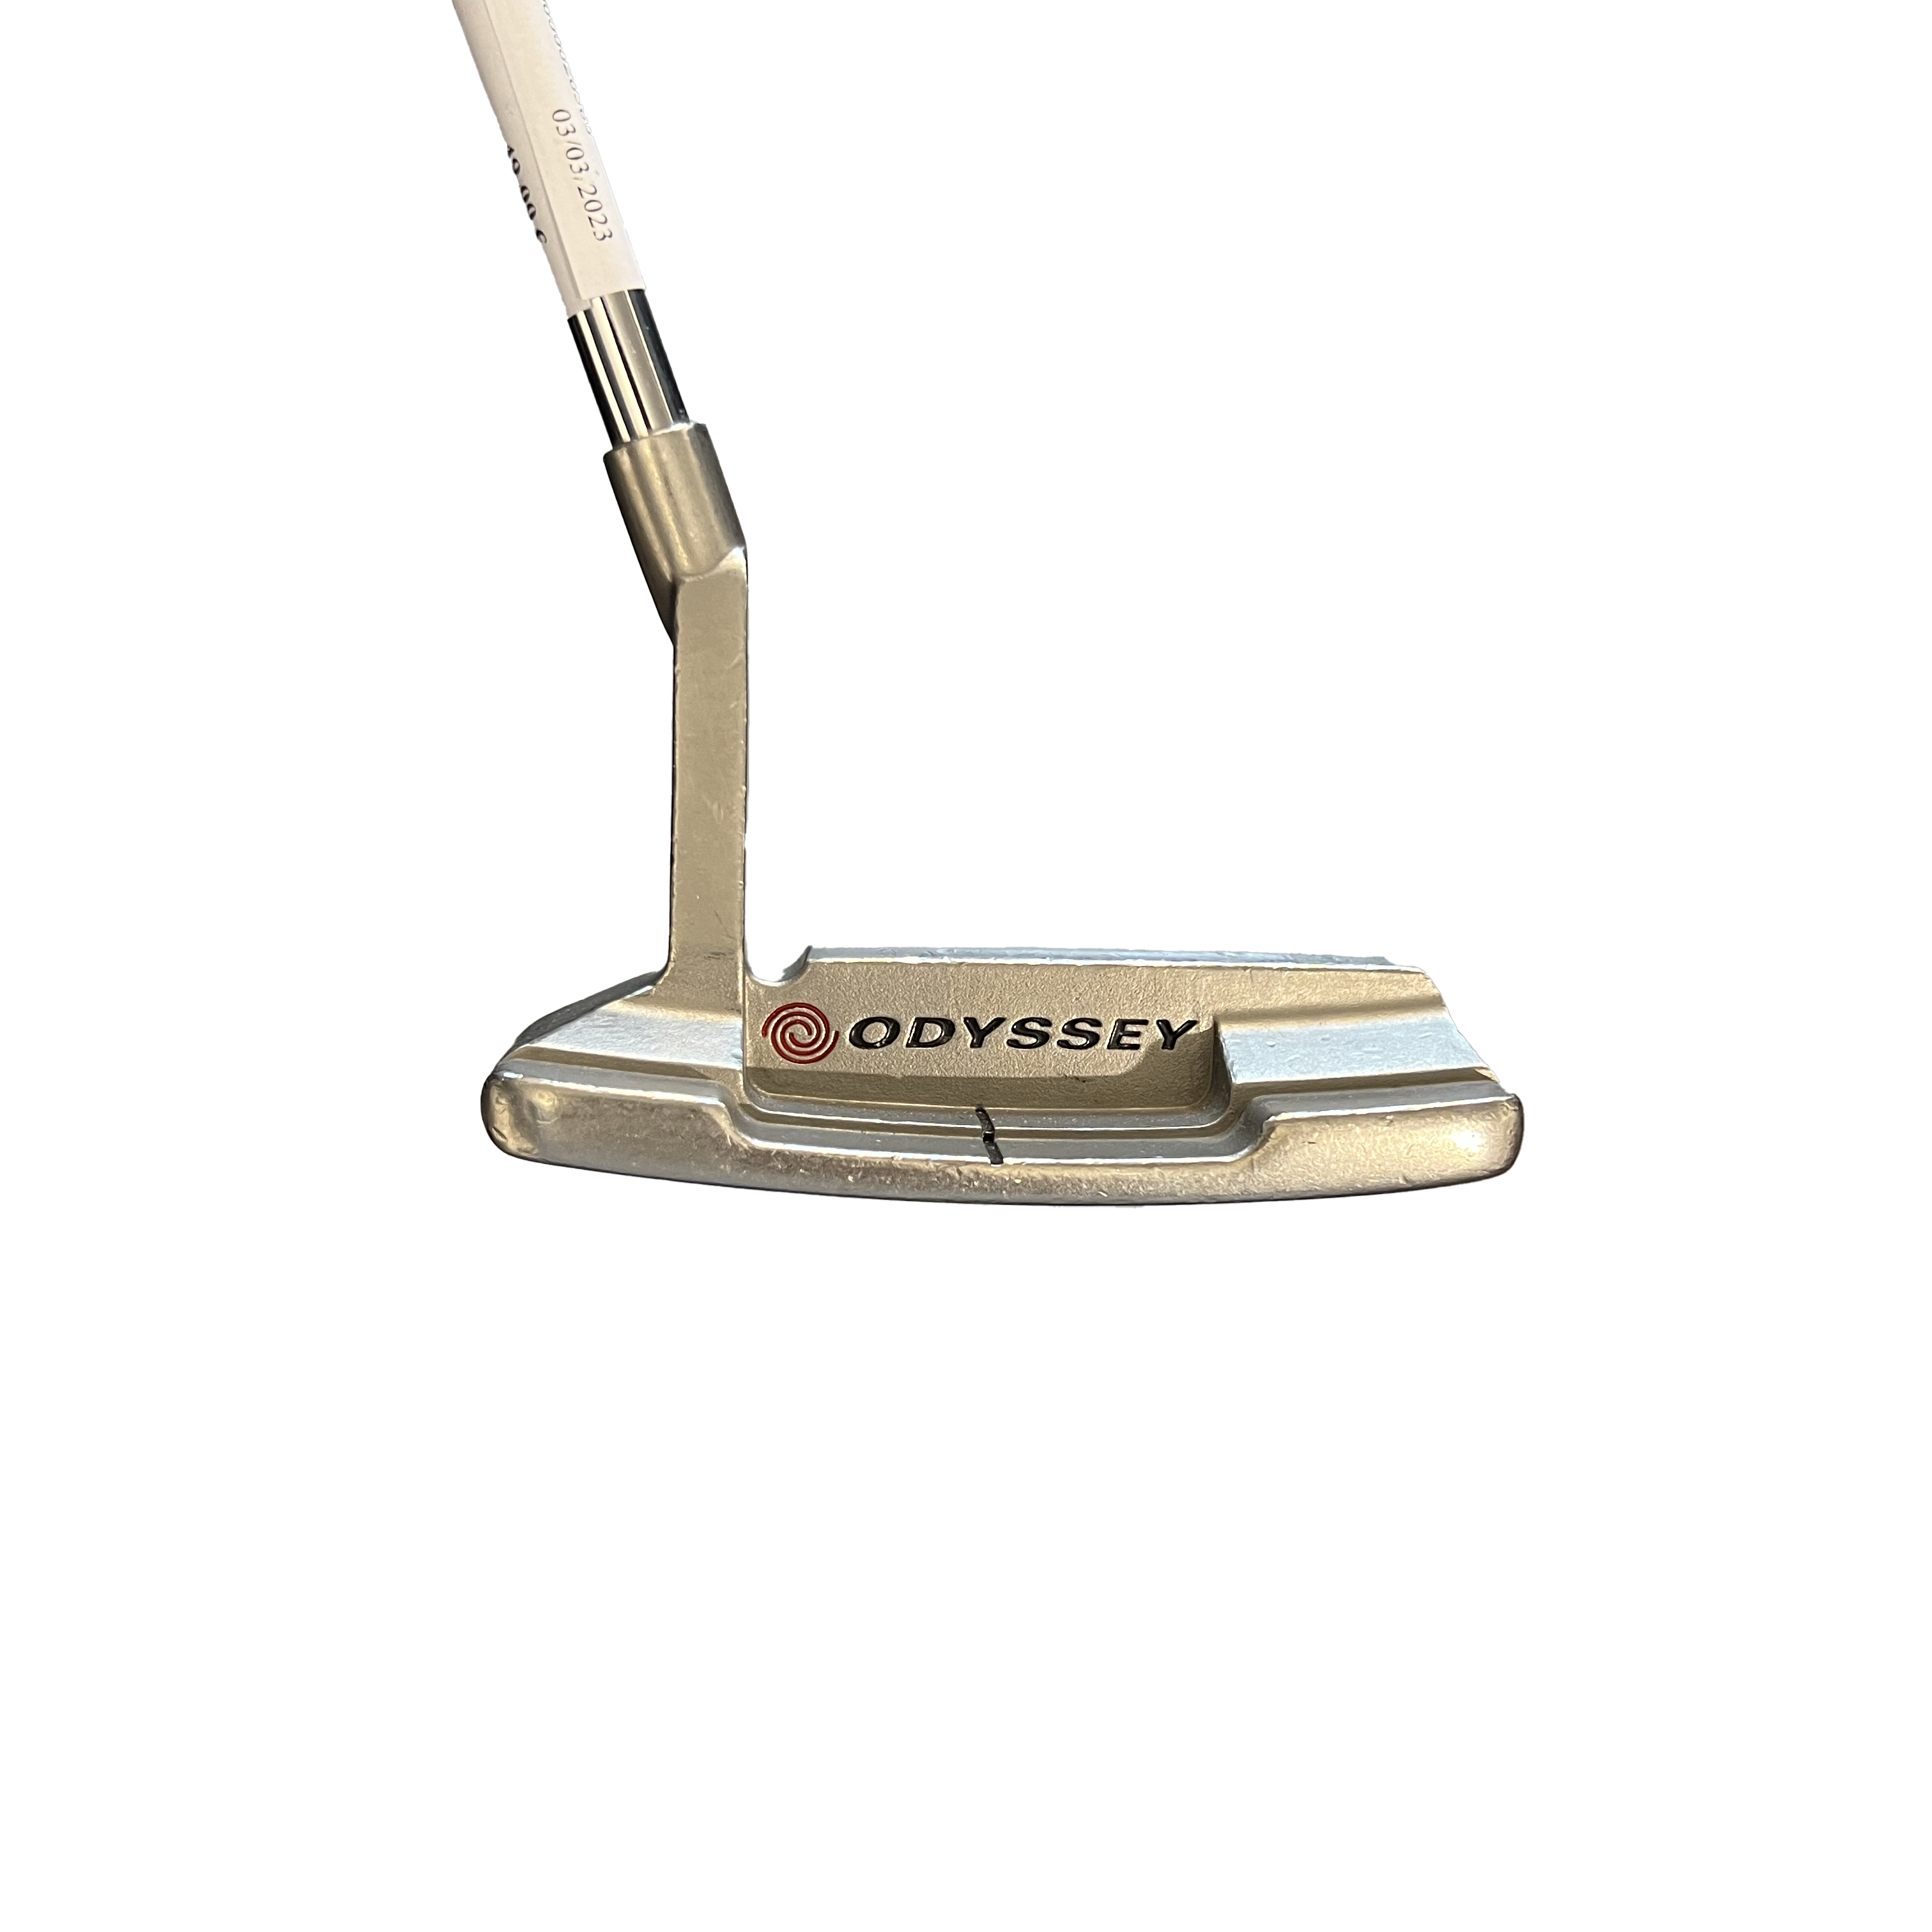 ODYSSEY - PUTTER WHITE HOT N°1